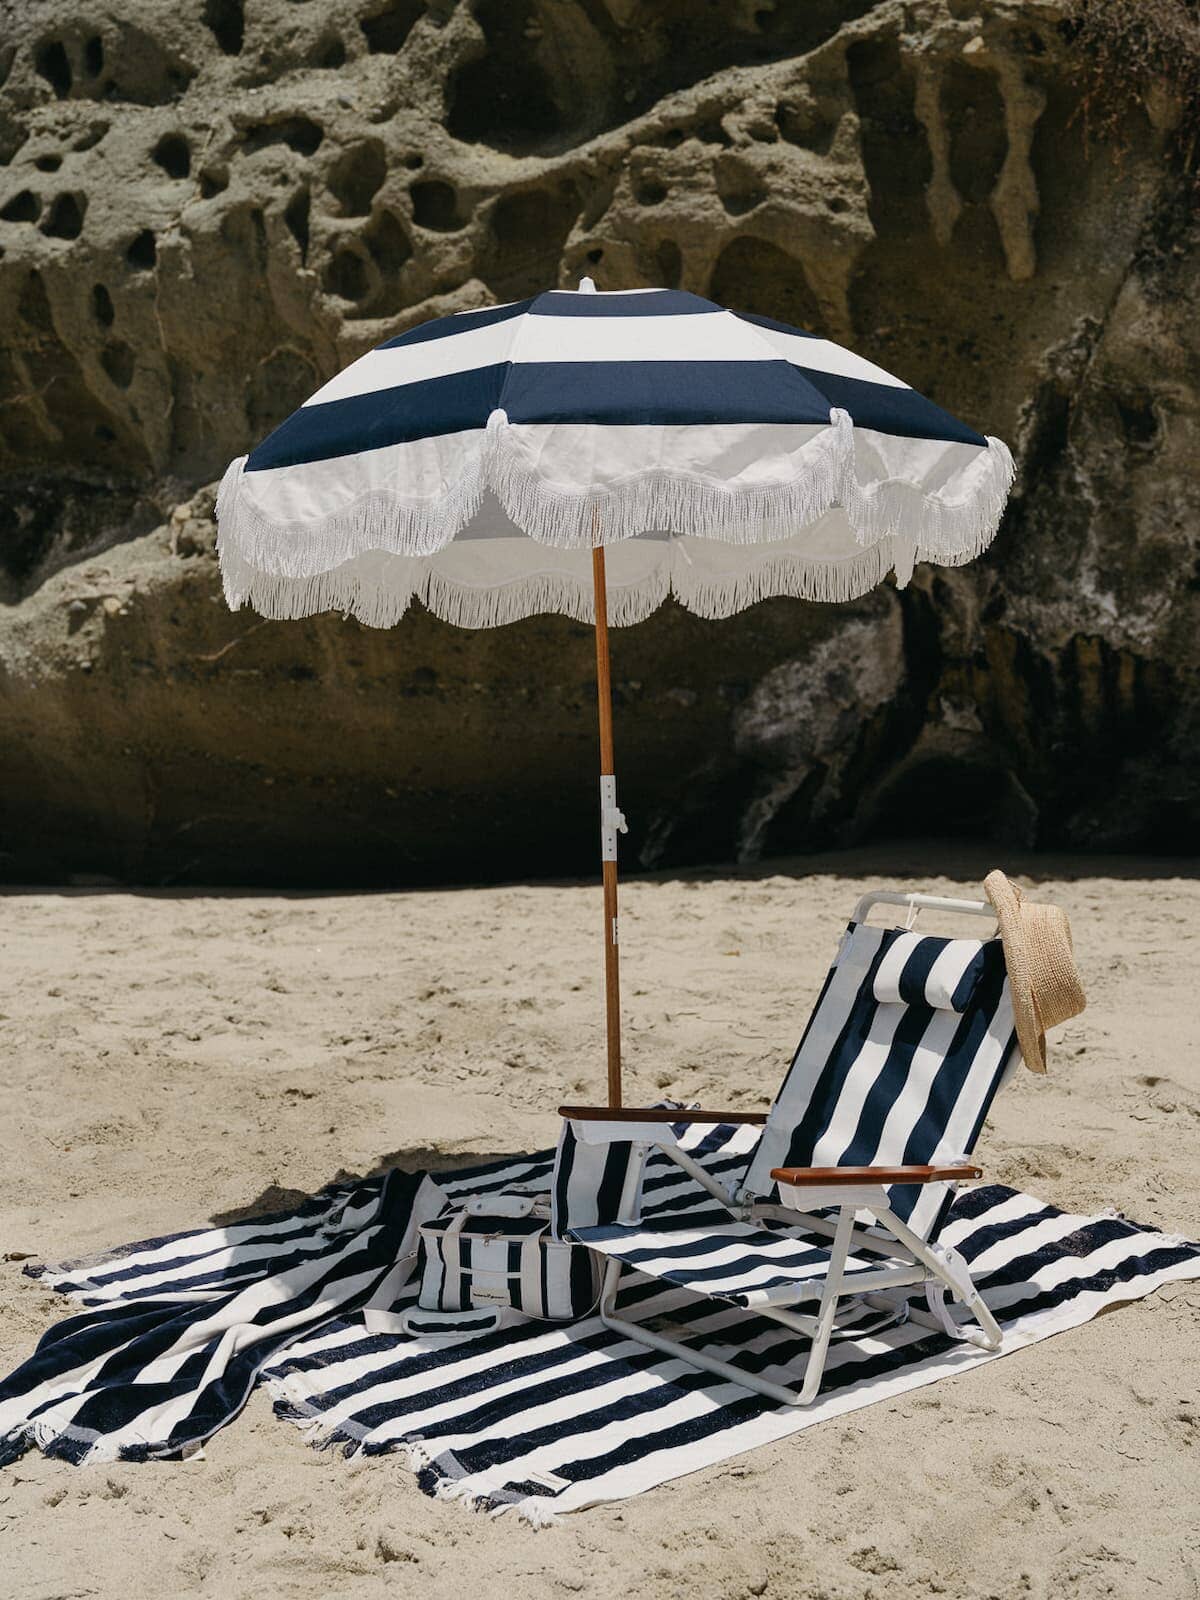 beach setting with navy blanket, umbrella and chair